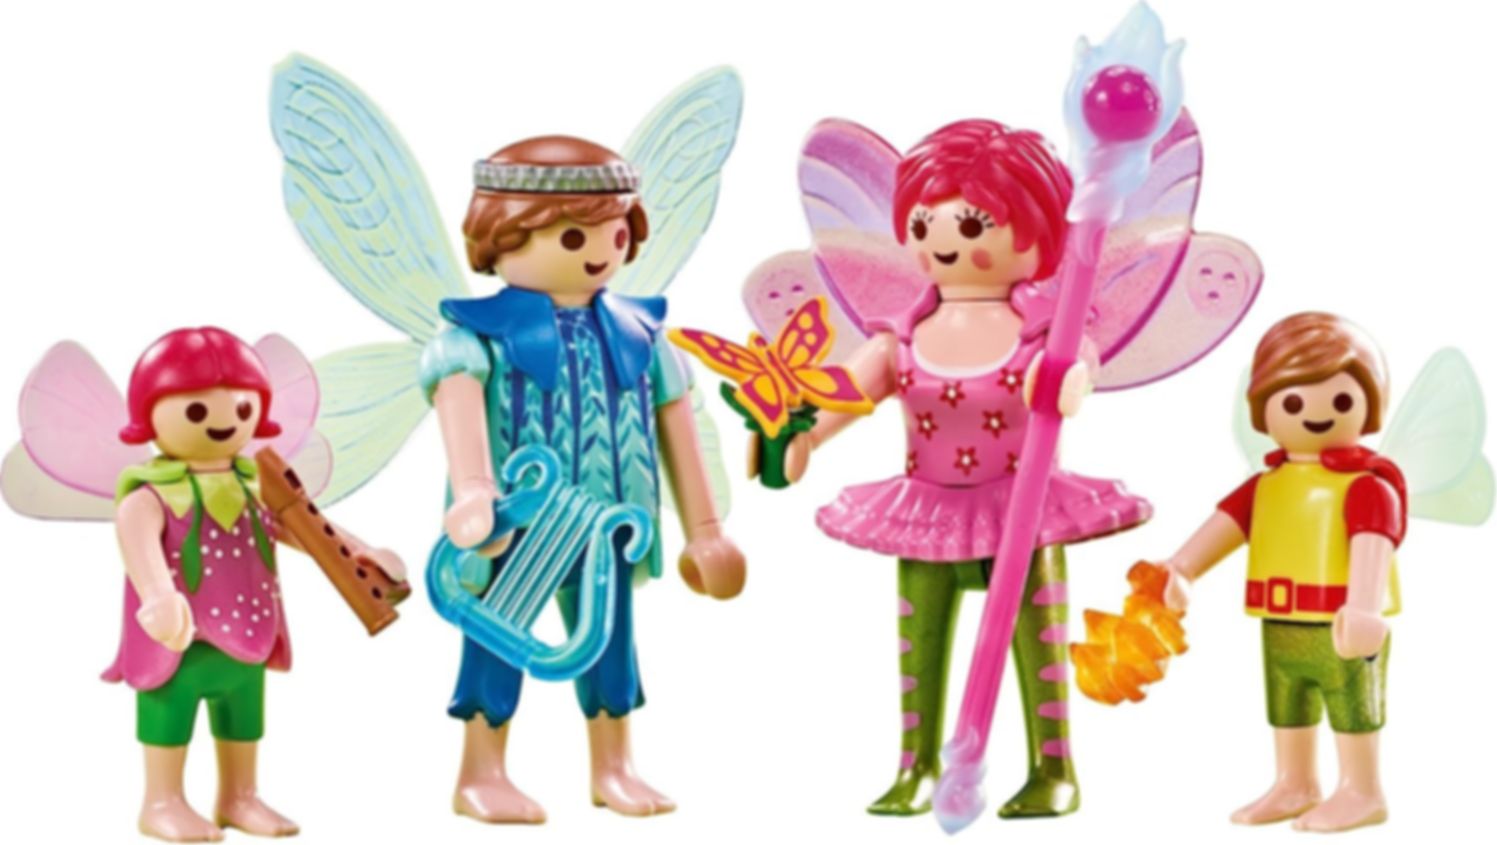 Fairy Family components